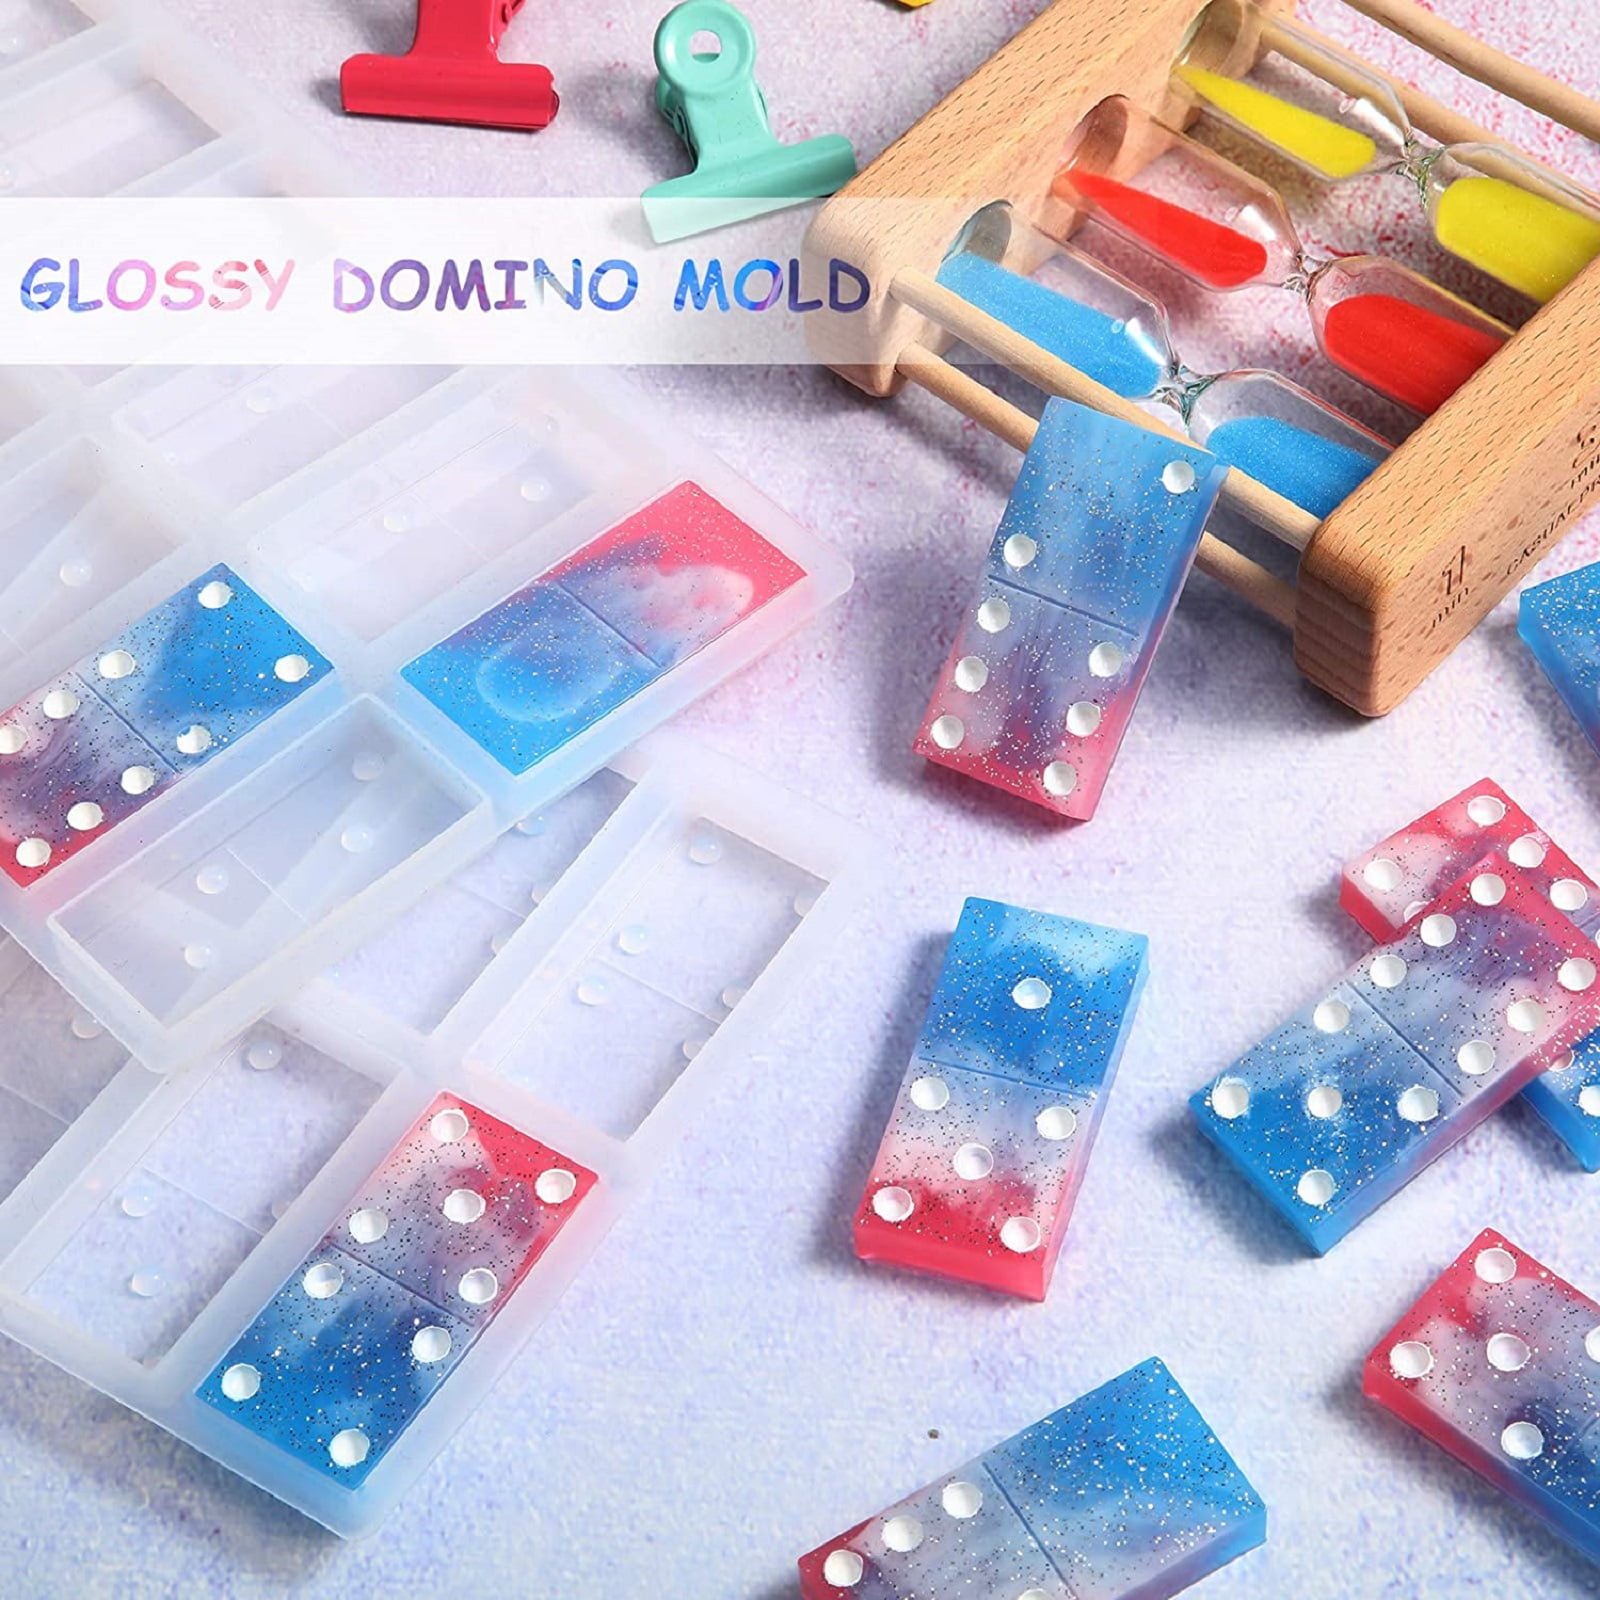 Resin Molds for Dominoes, Domino Molds for Epoxy Resin Casting, Silicone  Molds for DIY Domino Set, Keychains, Jewelry Making : Buy Online at Best  Price in KSA - Souq is now 